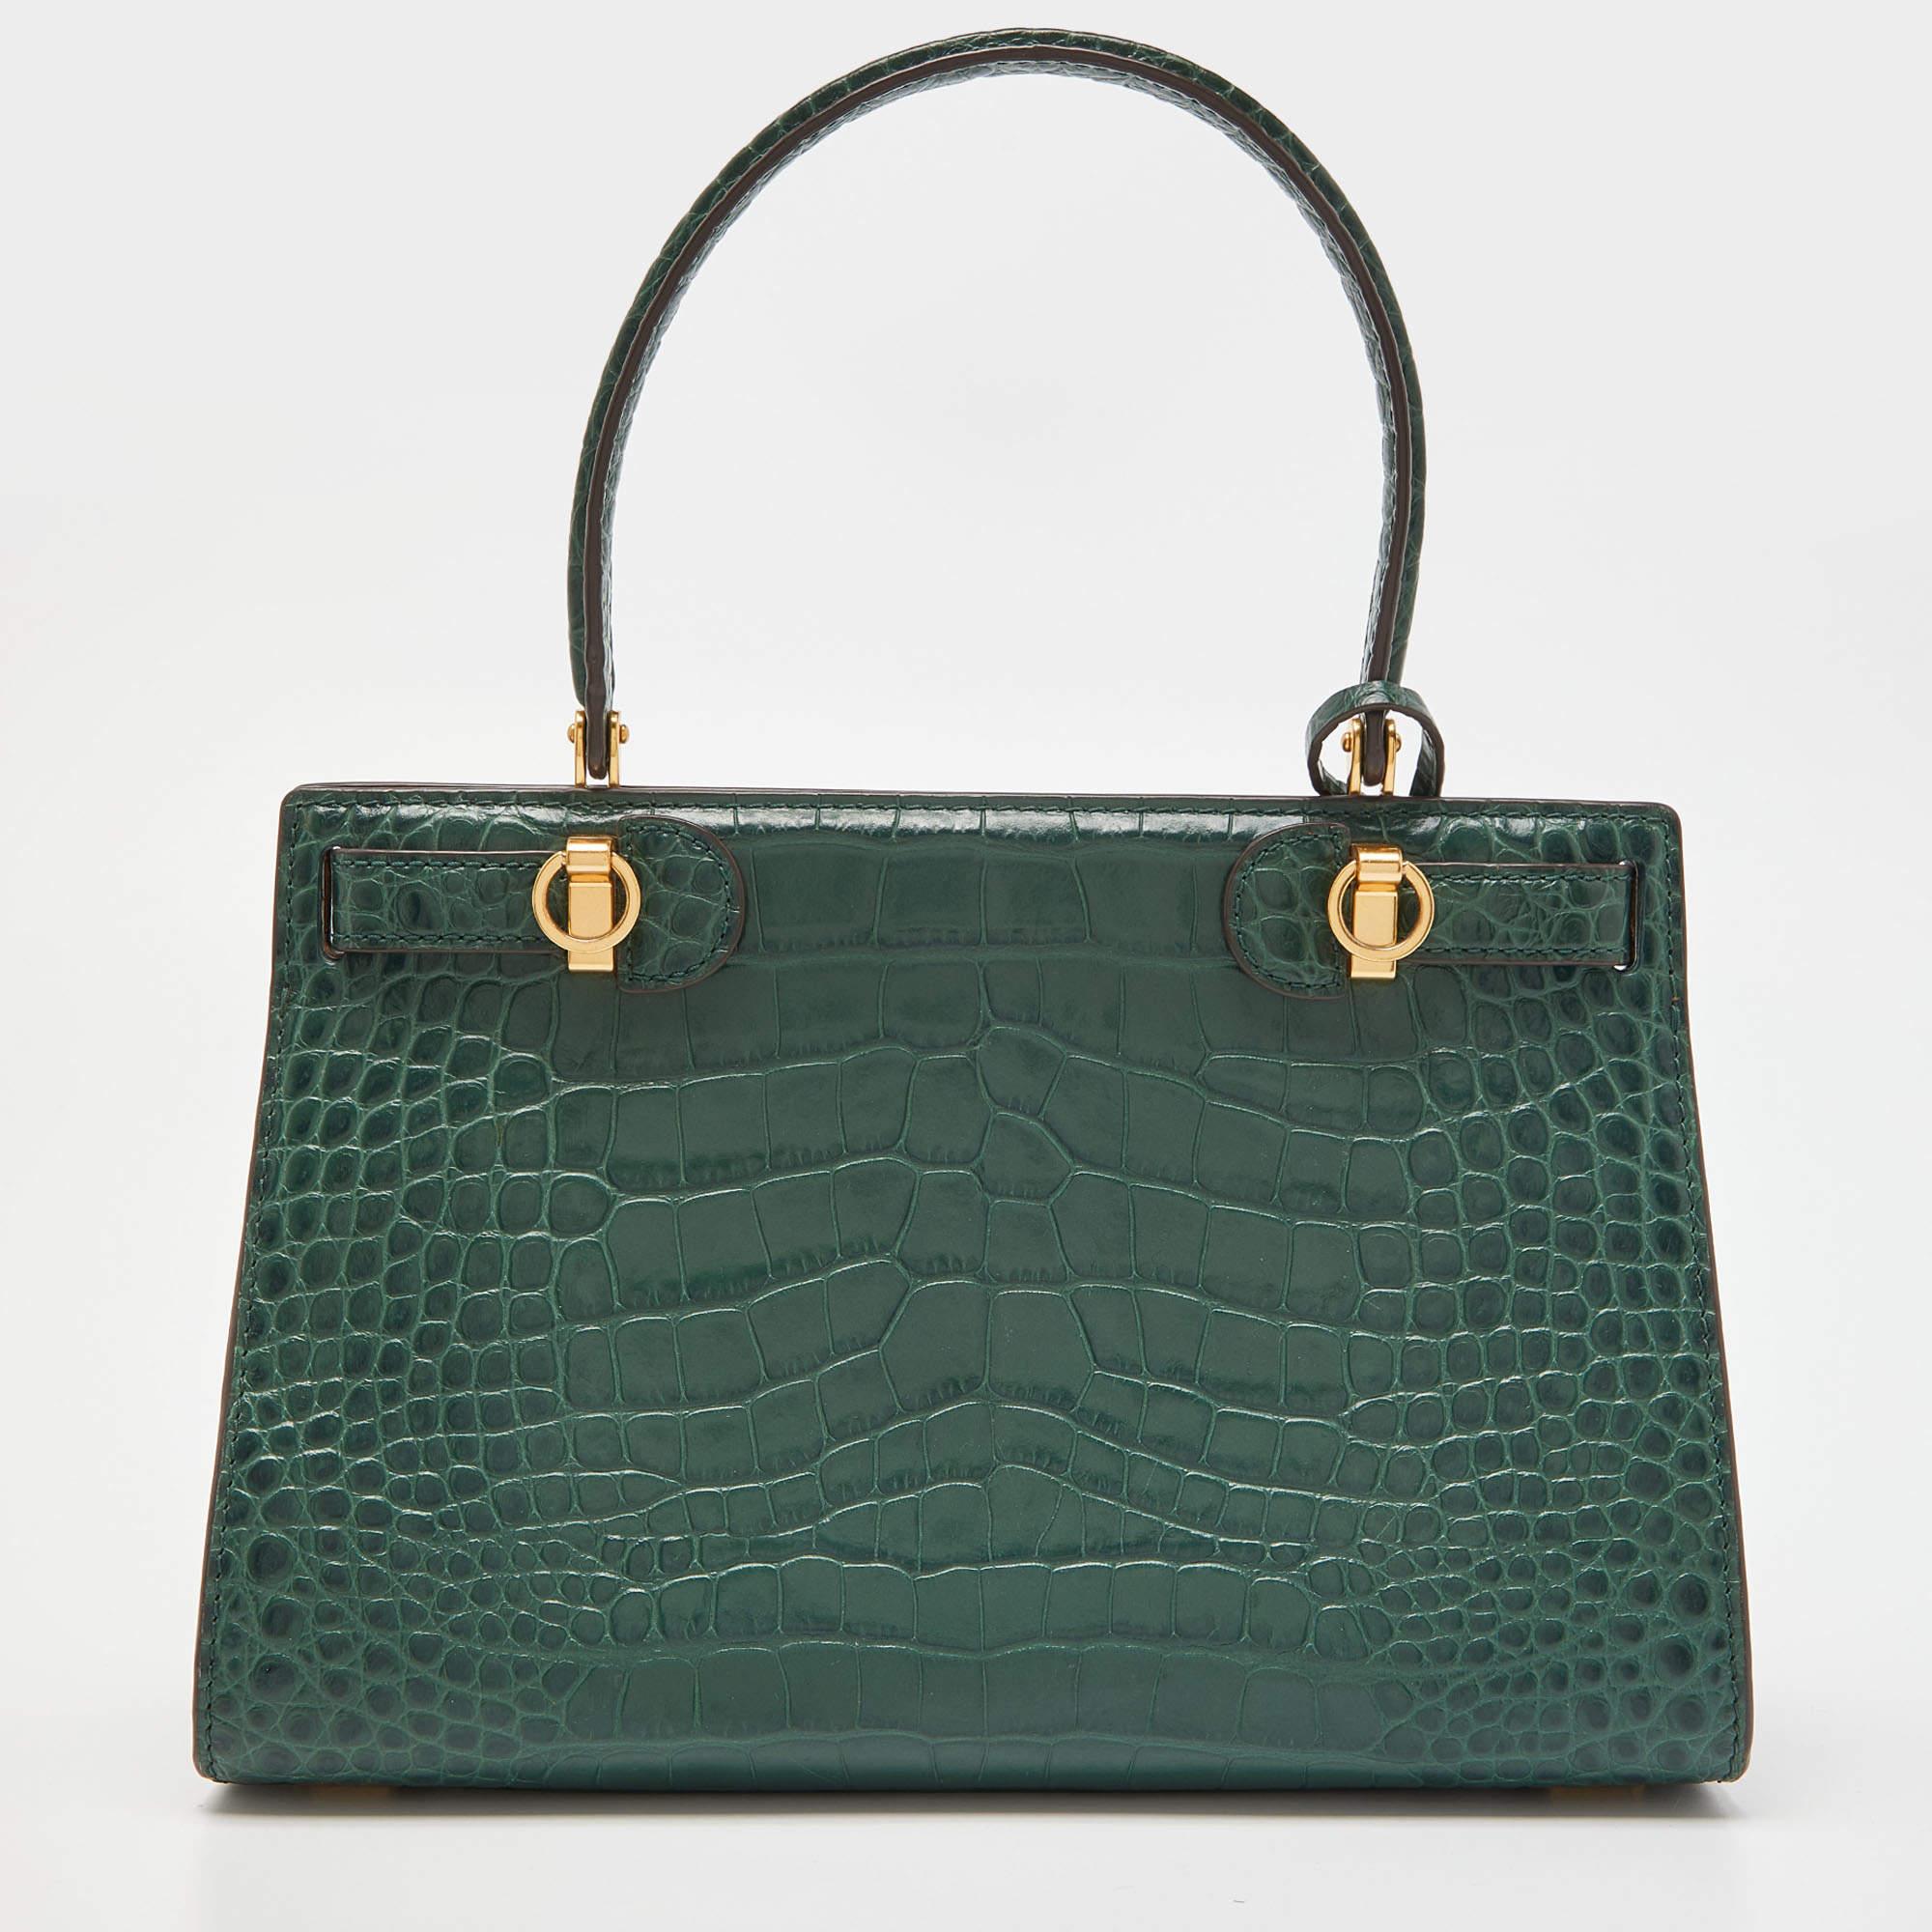 Tory Burch's Lee Radziwill Satchel is updated in gorgeous green croc-embossed leather. Detailed with gold-tone hardware, this bag comes fitted with a slim top handle. Set on protective base studs, this bag is secured with a gold-tone lock. The